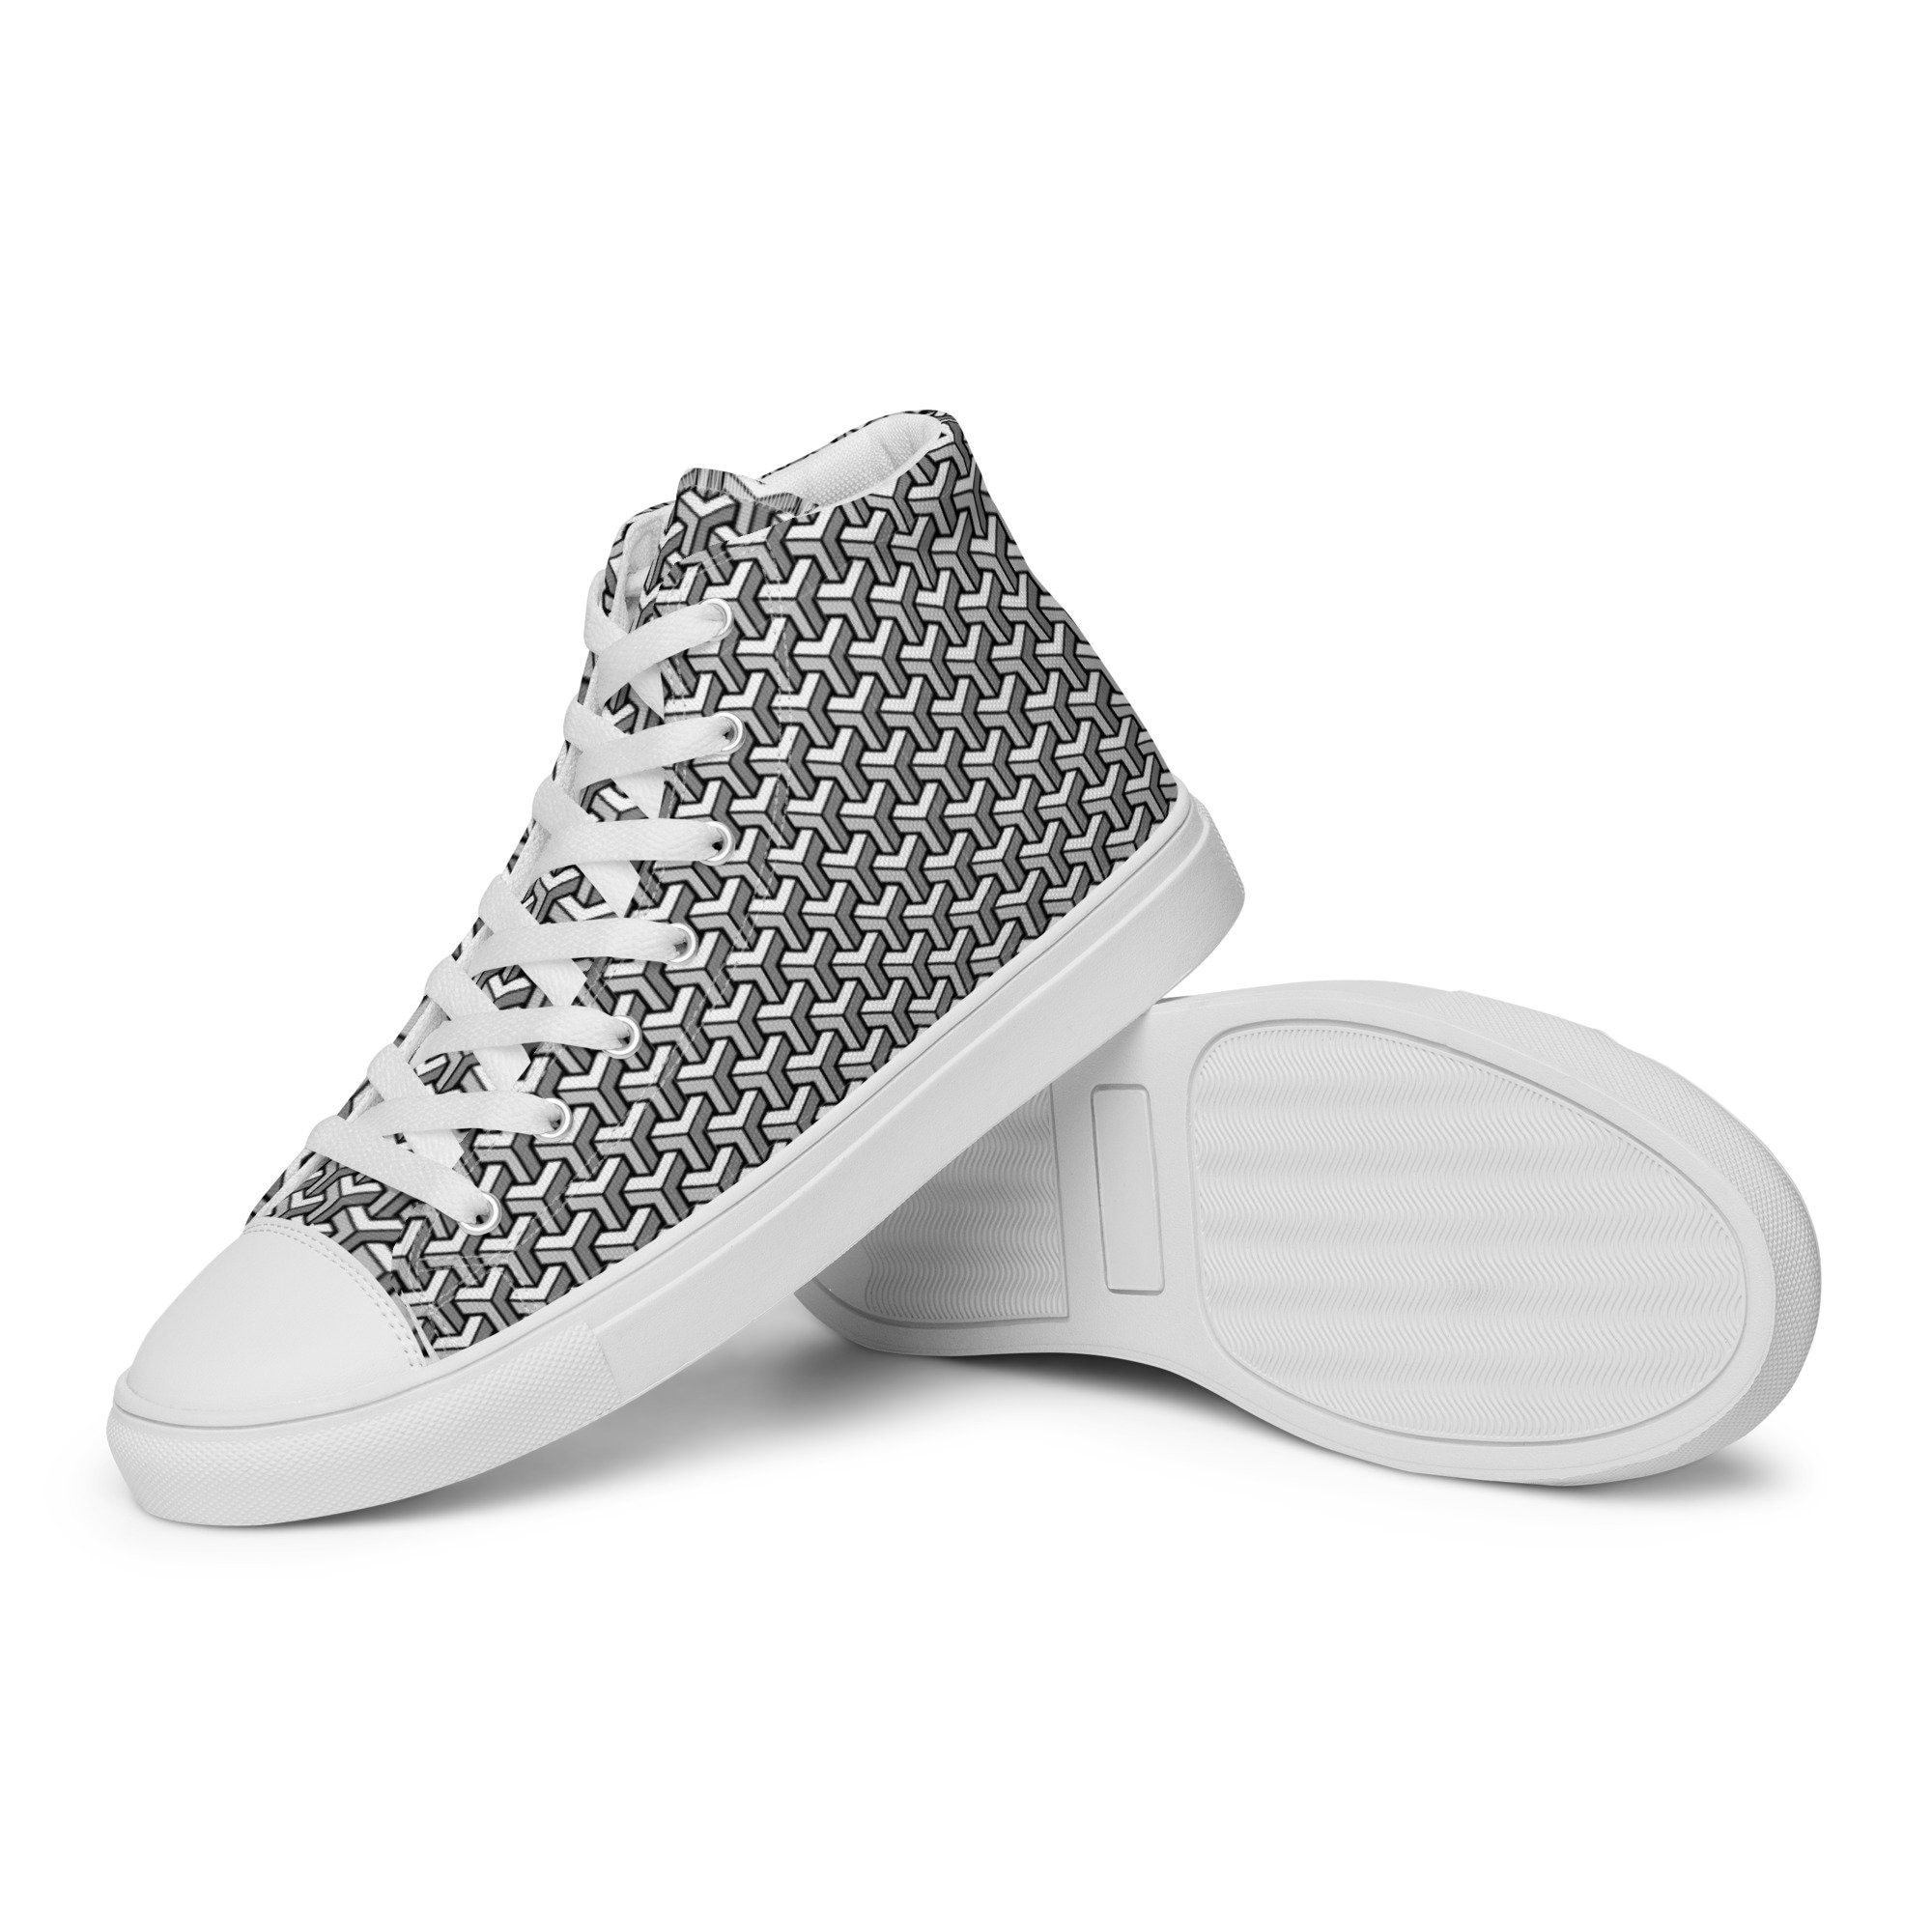 Buy Cheap Dior Shoes for Men's Sneakers #9999925052 from